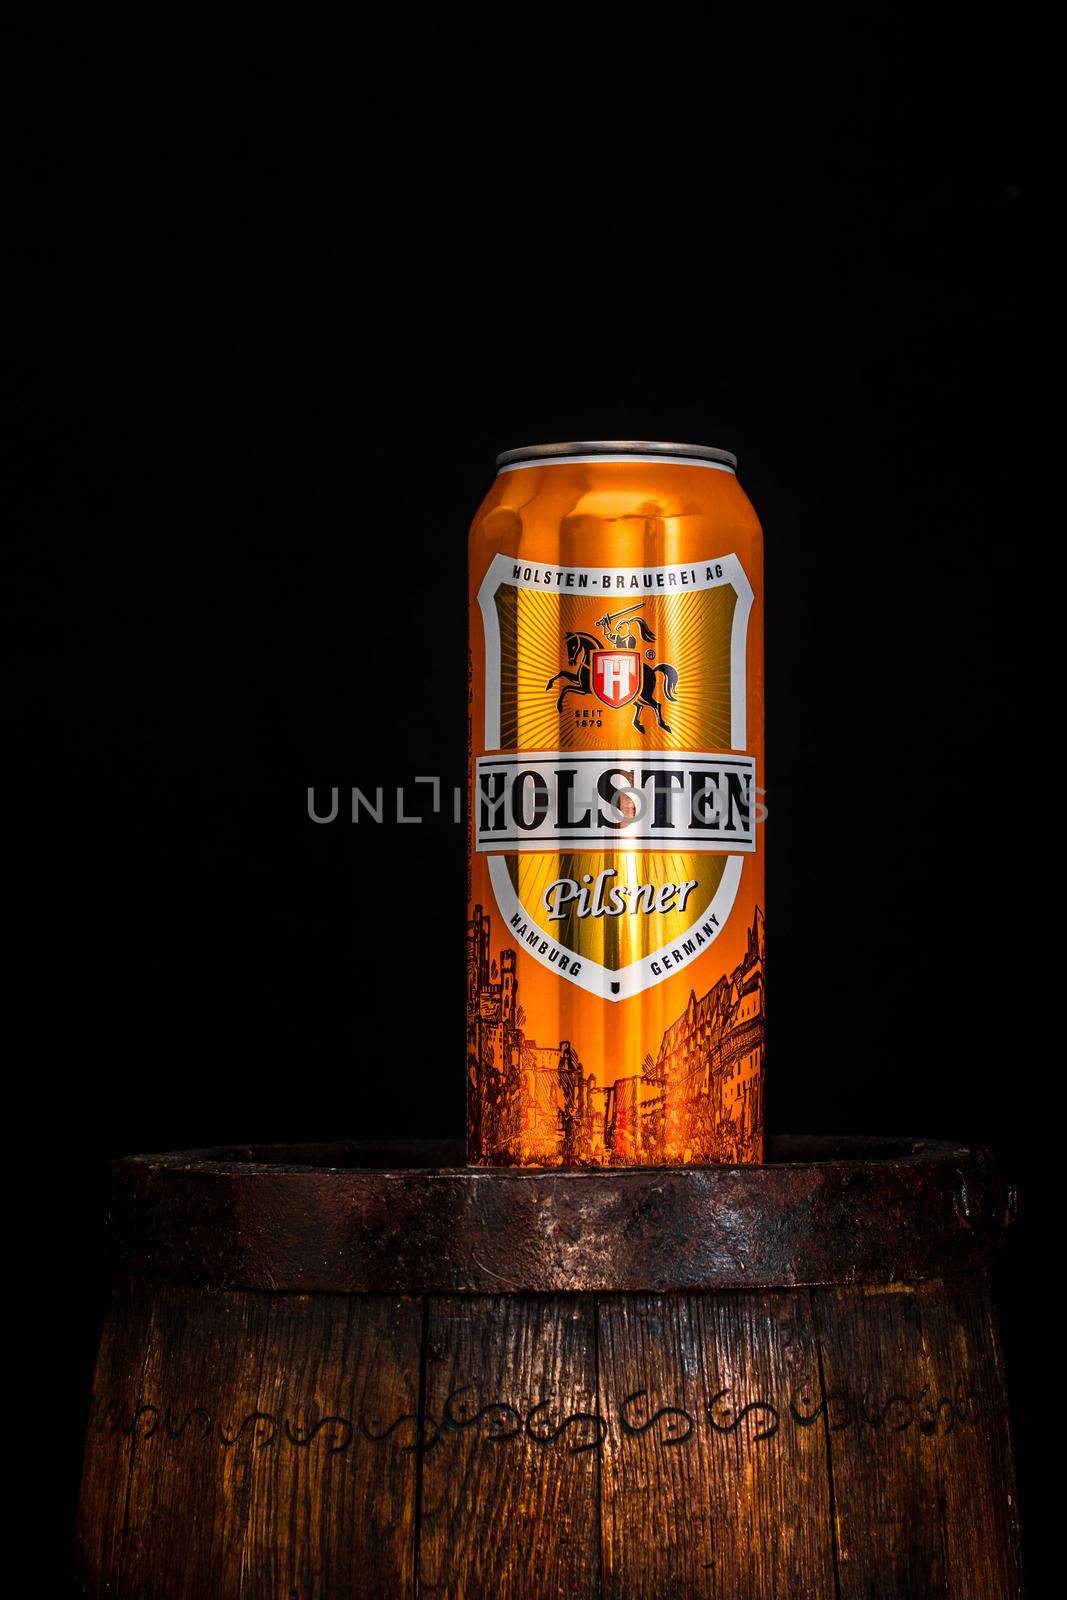 Can of Holsten beer on beer barrel with dark background. Illustrative editorial photo shot in Bucharest, Romania, 2021